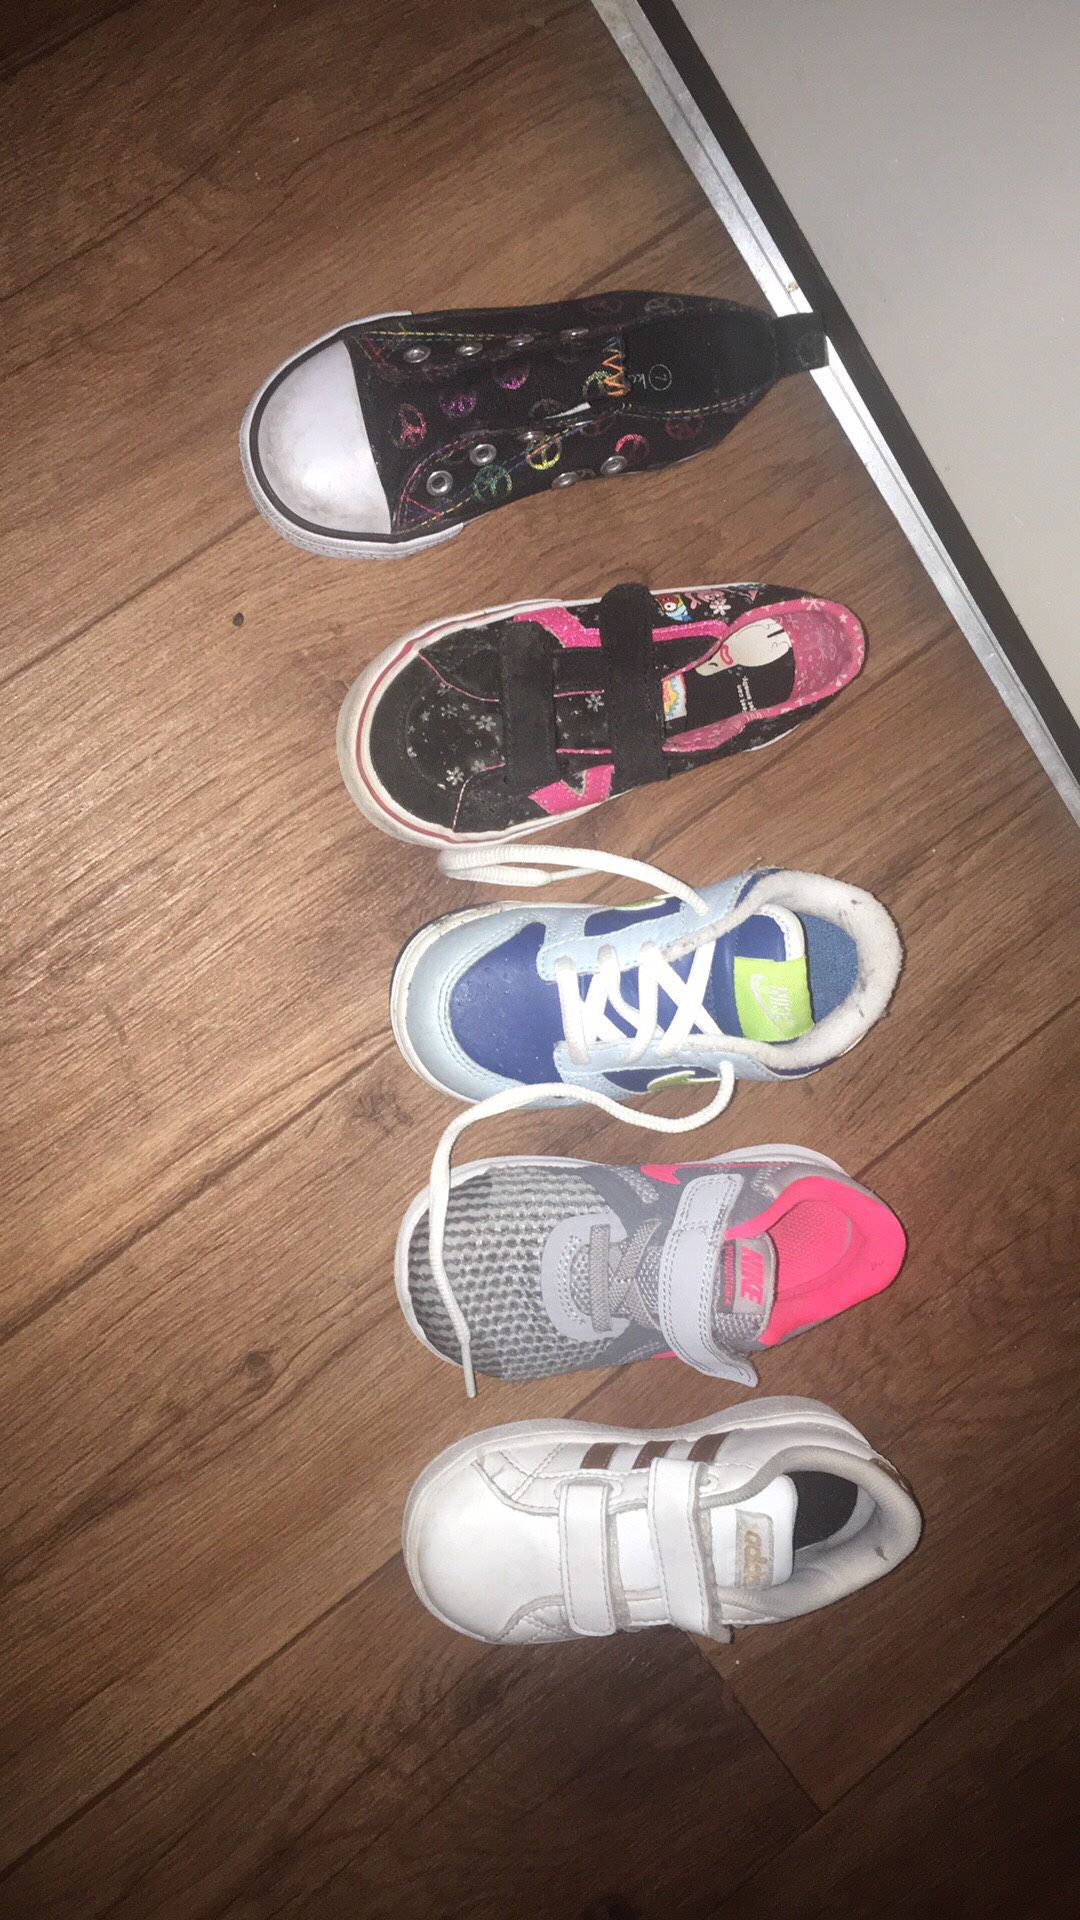 7c toddler shoes